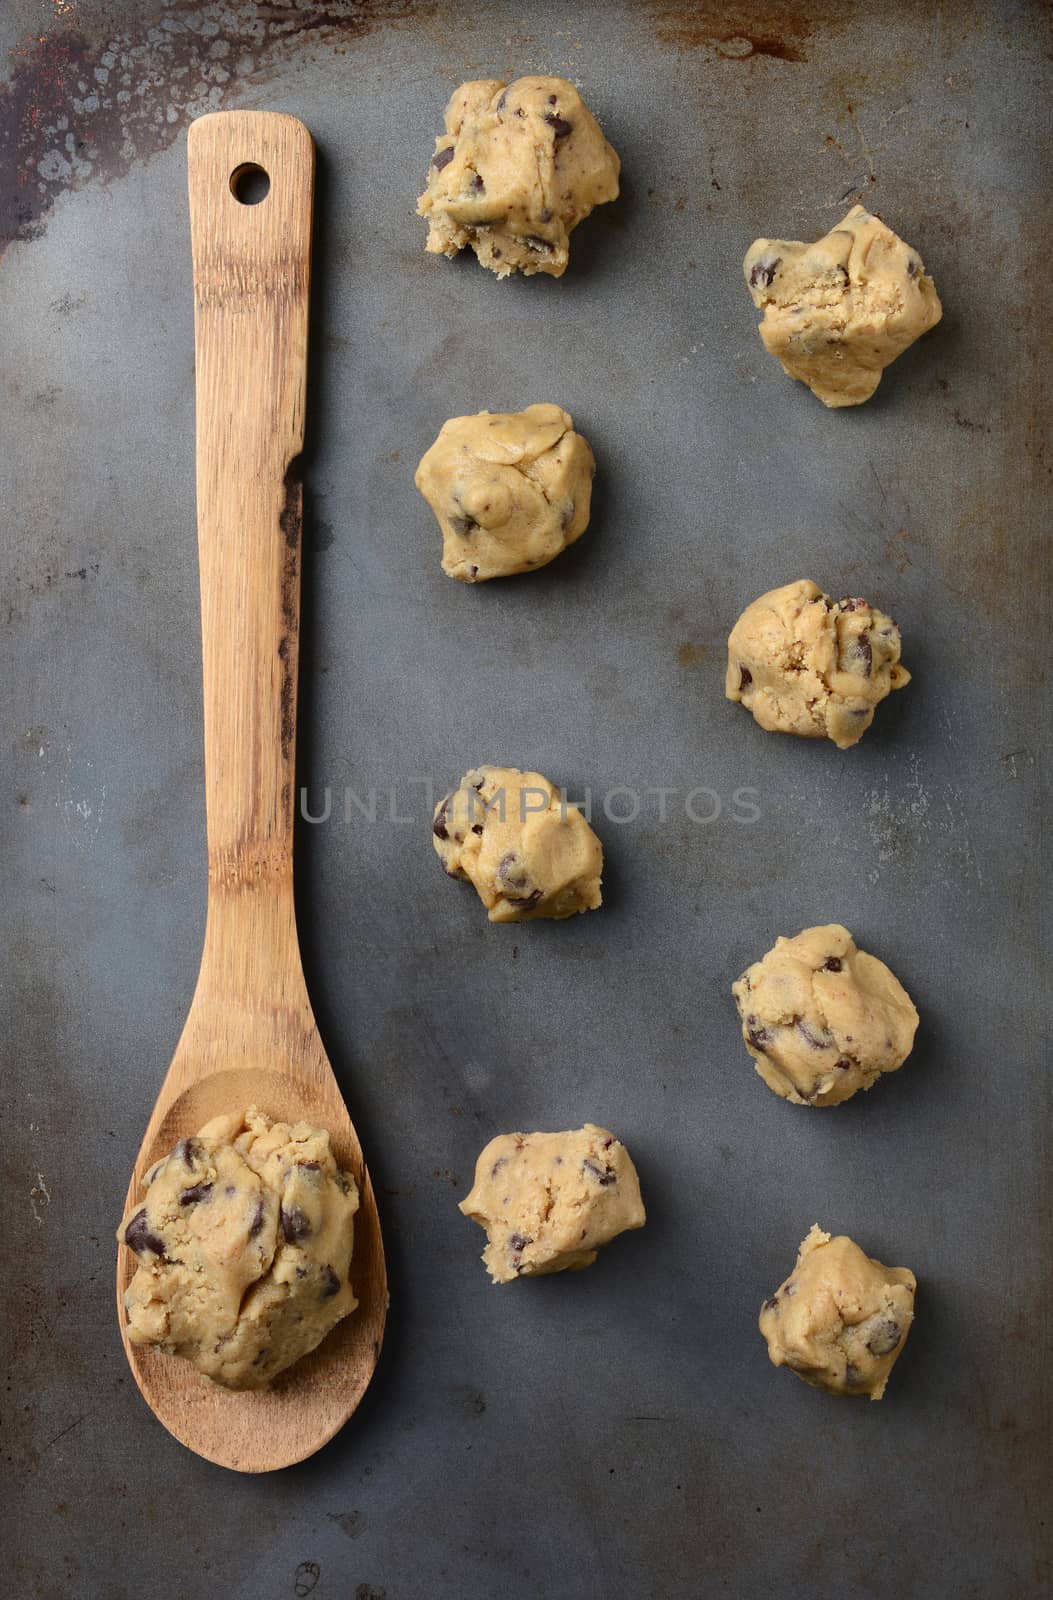 Baking Chocolate Chip Cookies by sCukrov